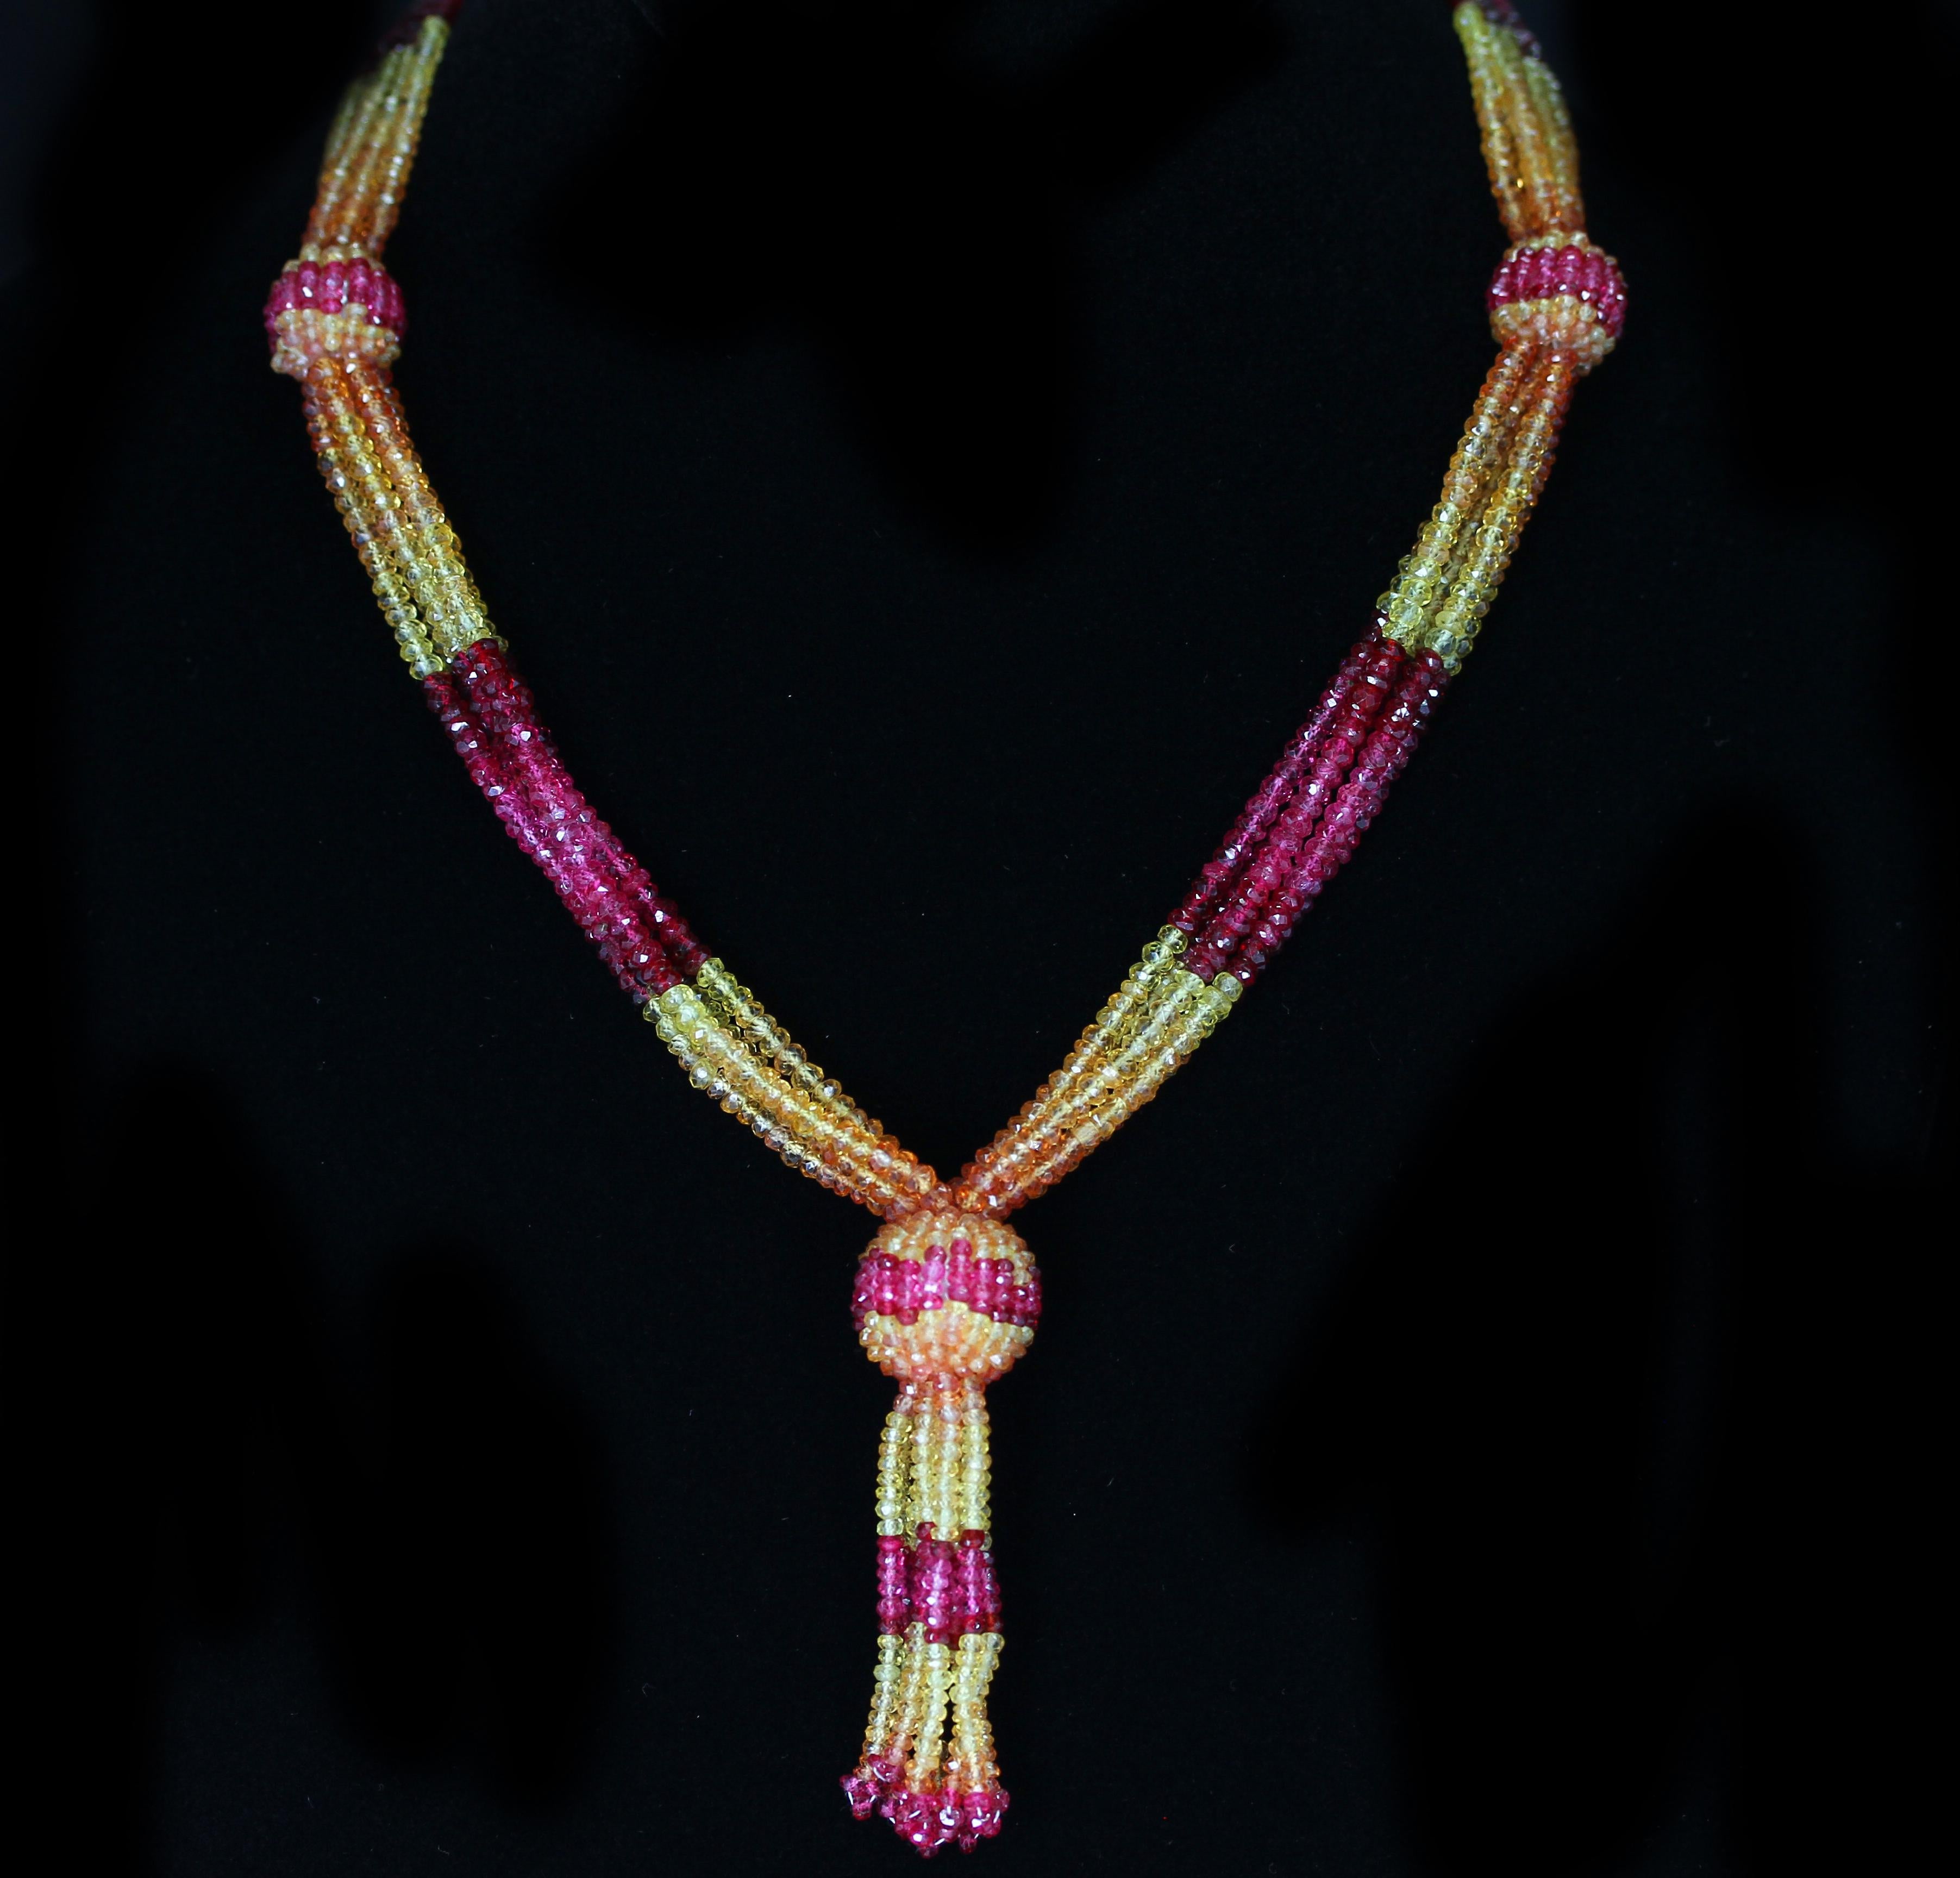 A beautiful tassel necklace with shaded Faceted Yellow and Orange Sapphire Beads with Spinel, with an 18K Yellow Gold Clasp with Diamonds. Weight: 315 cts. Necklace/Earring Set: Matching earrings available.